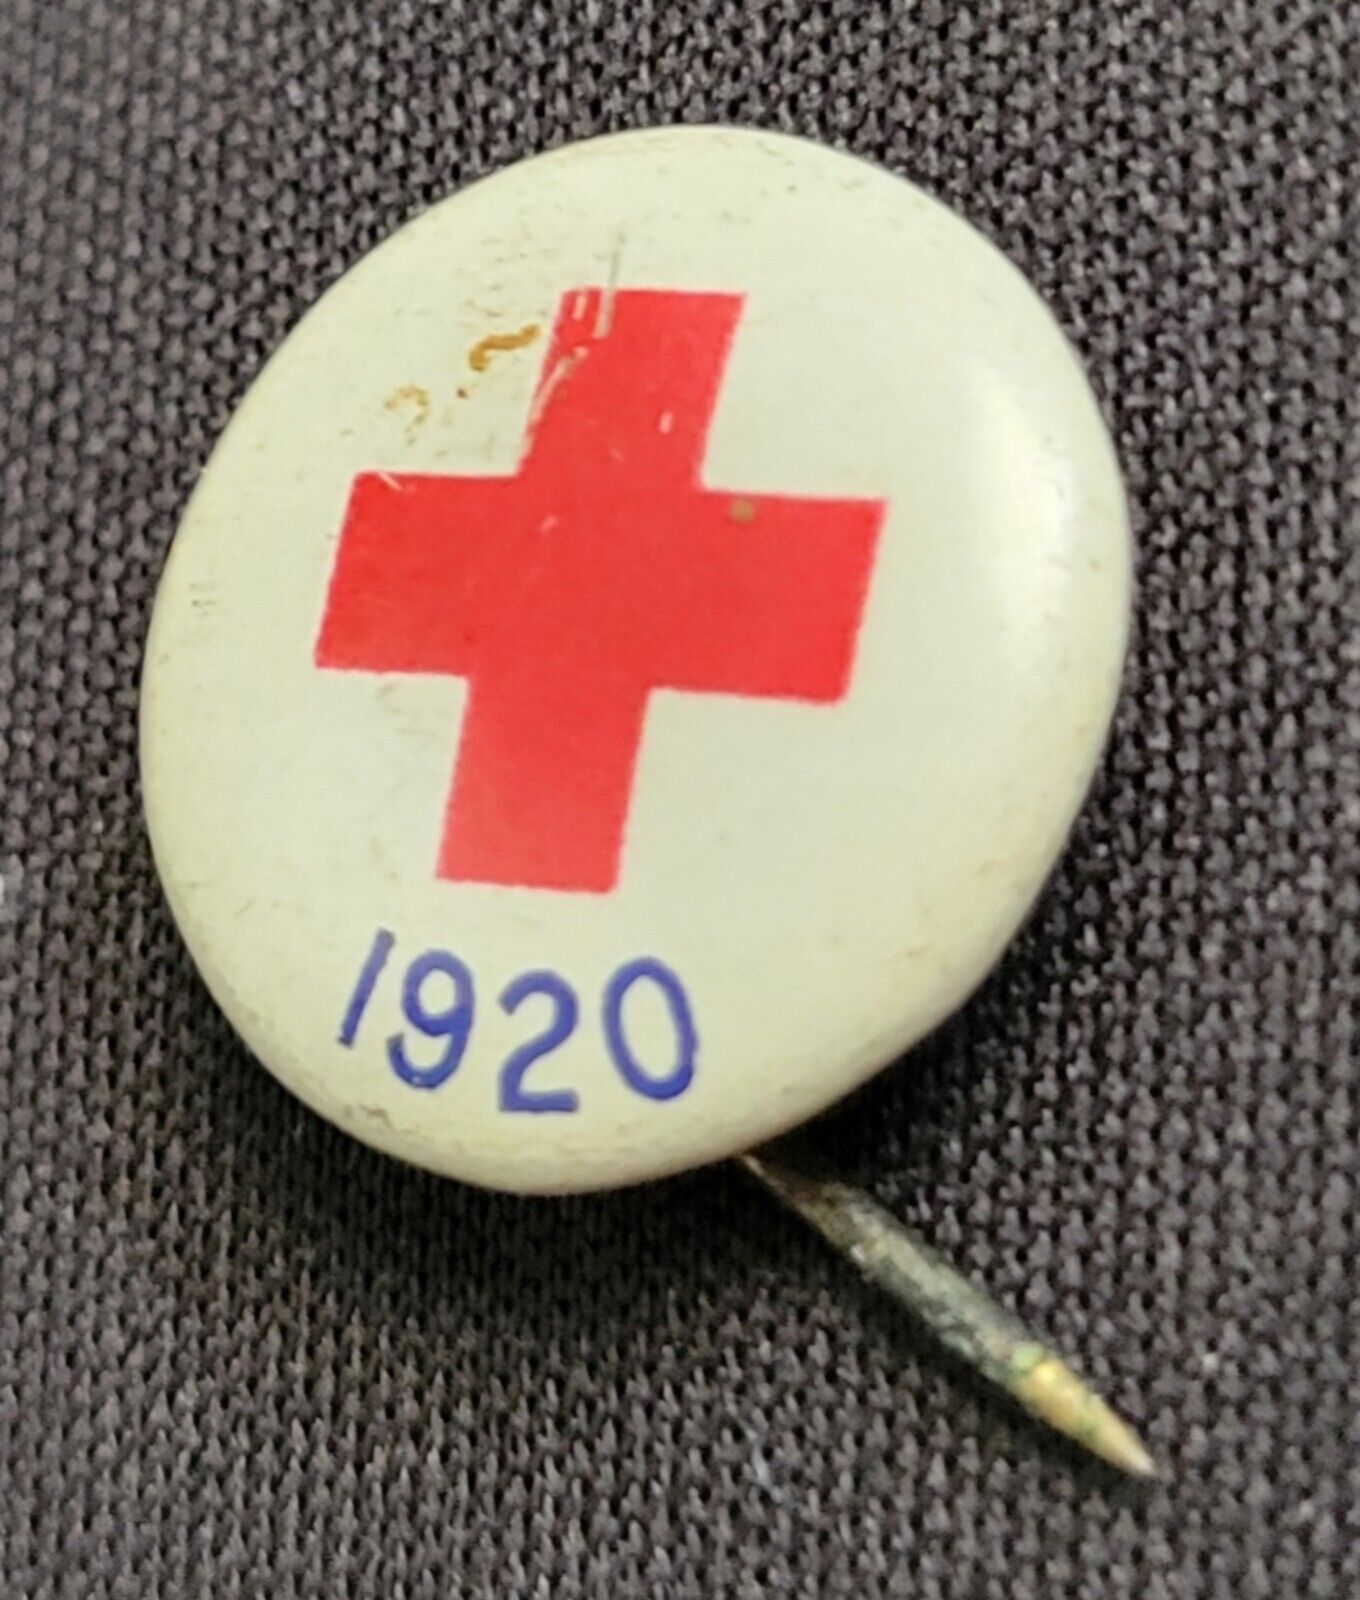 Antique 1920 Red Cross Pin Button